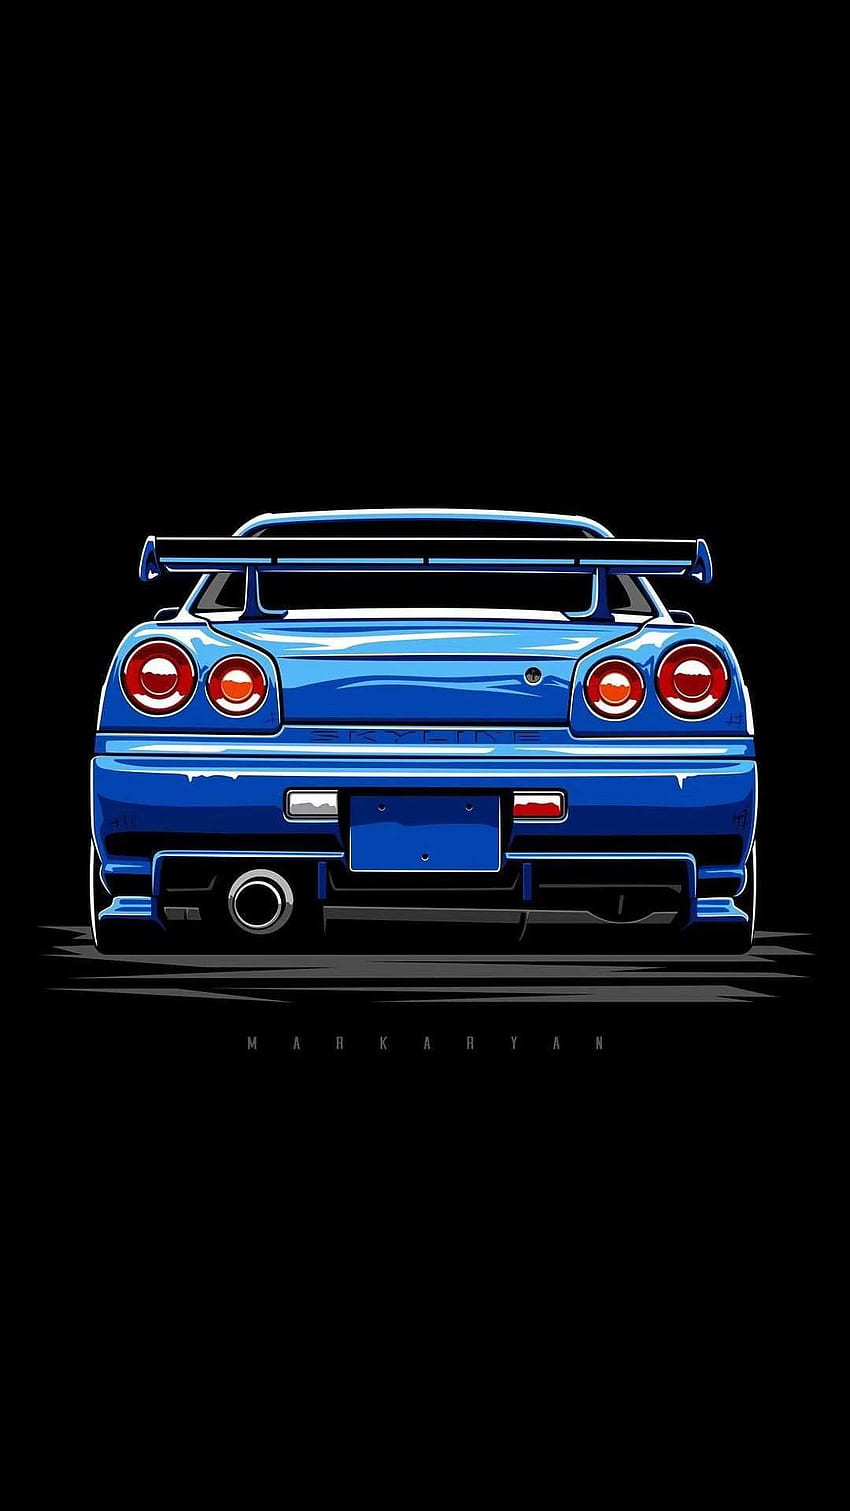 Modified blue nissan skyline r34 with gold rims 4K wallpaper download